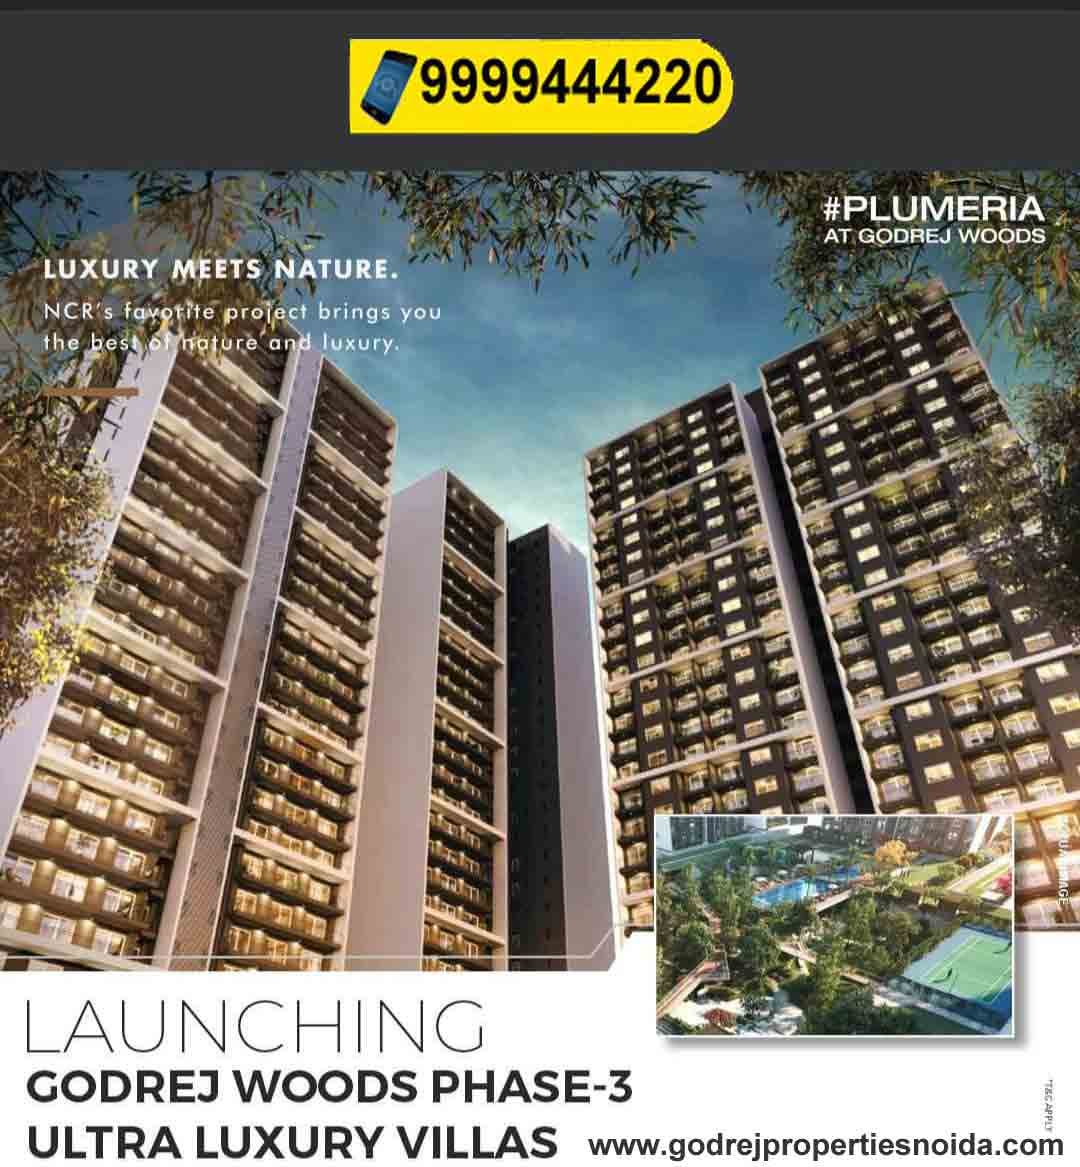 Godrej Woods Noida with Resort Luxuries and Great Development